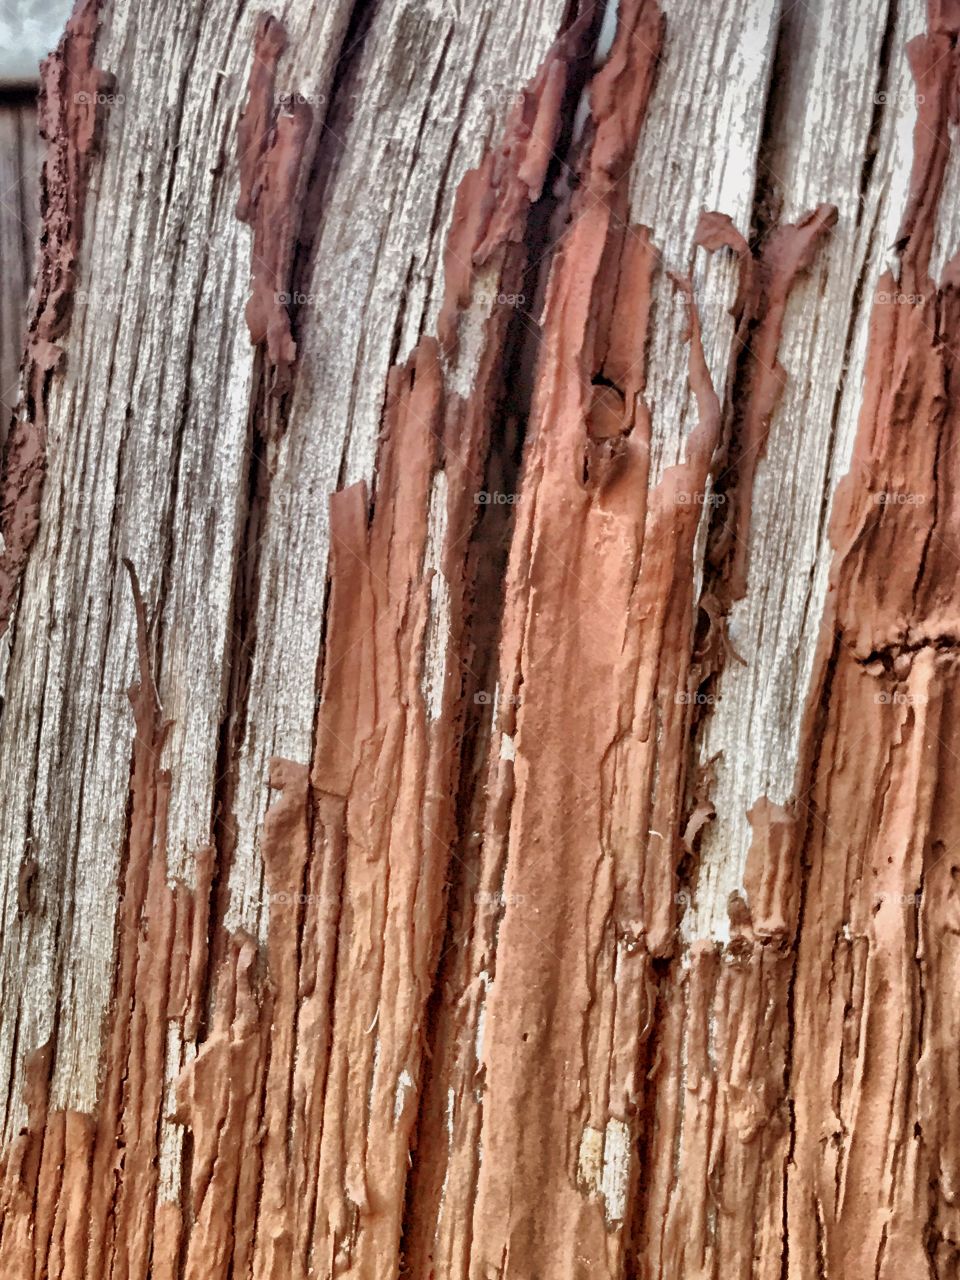 Paint chipping off wood texture 